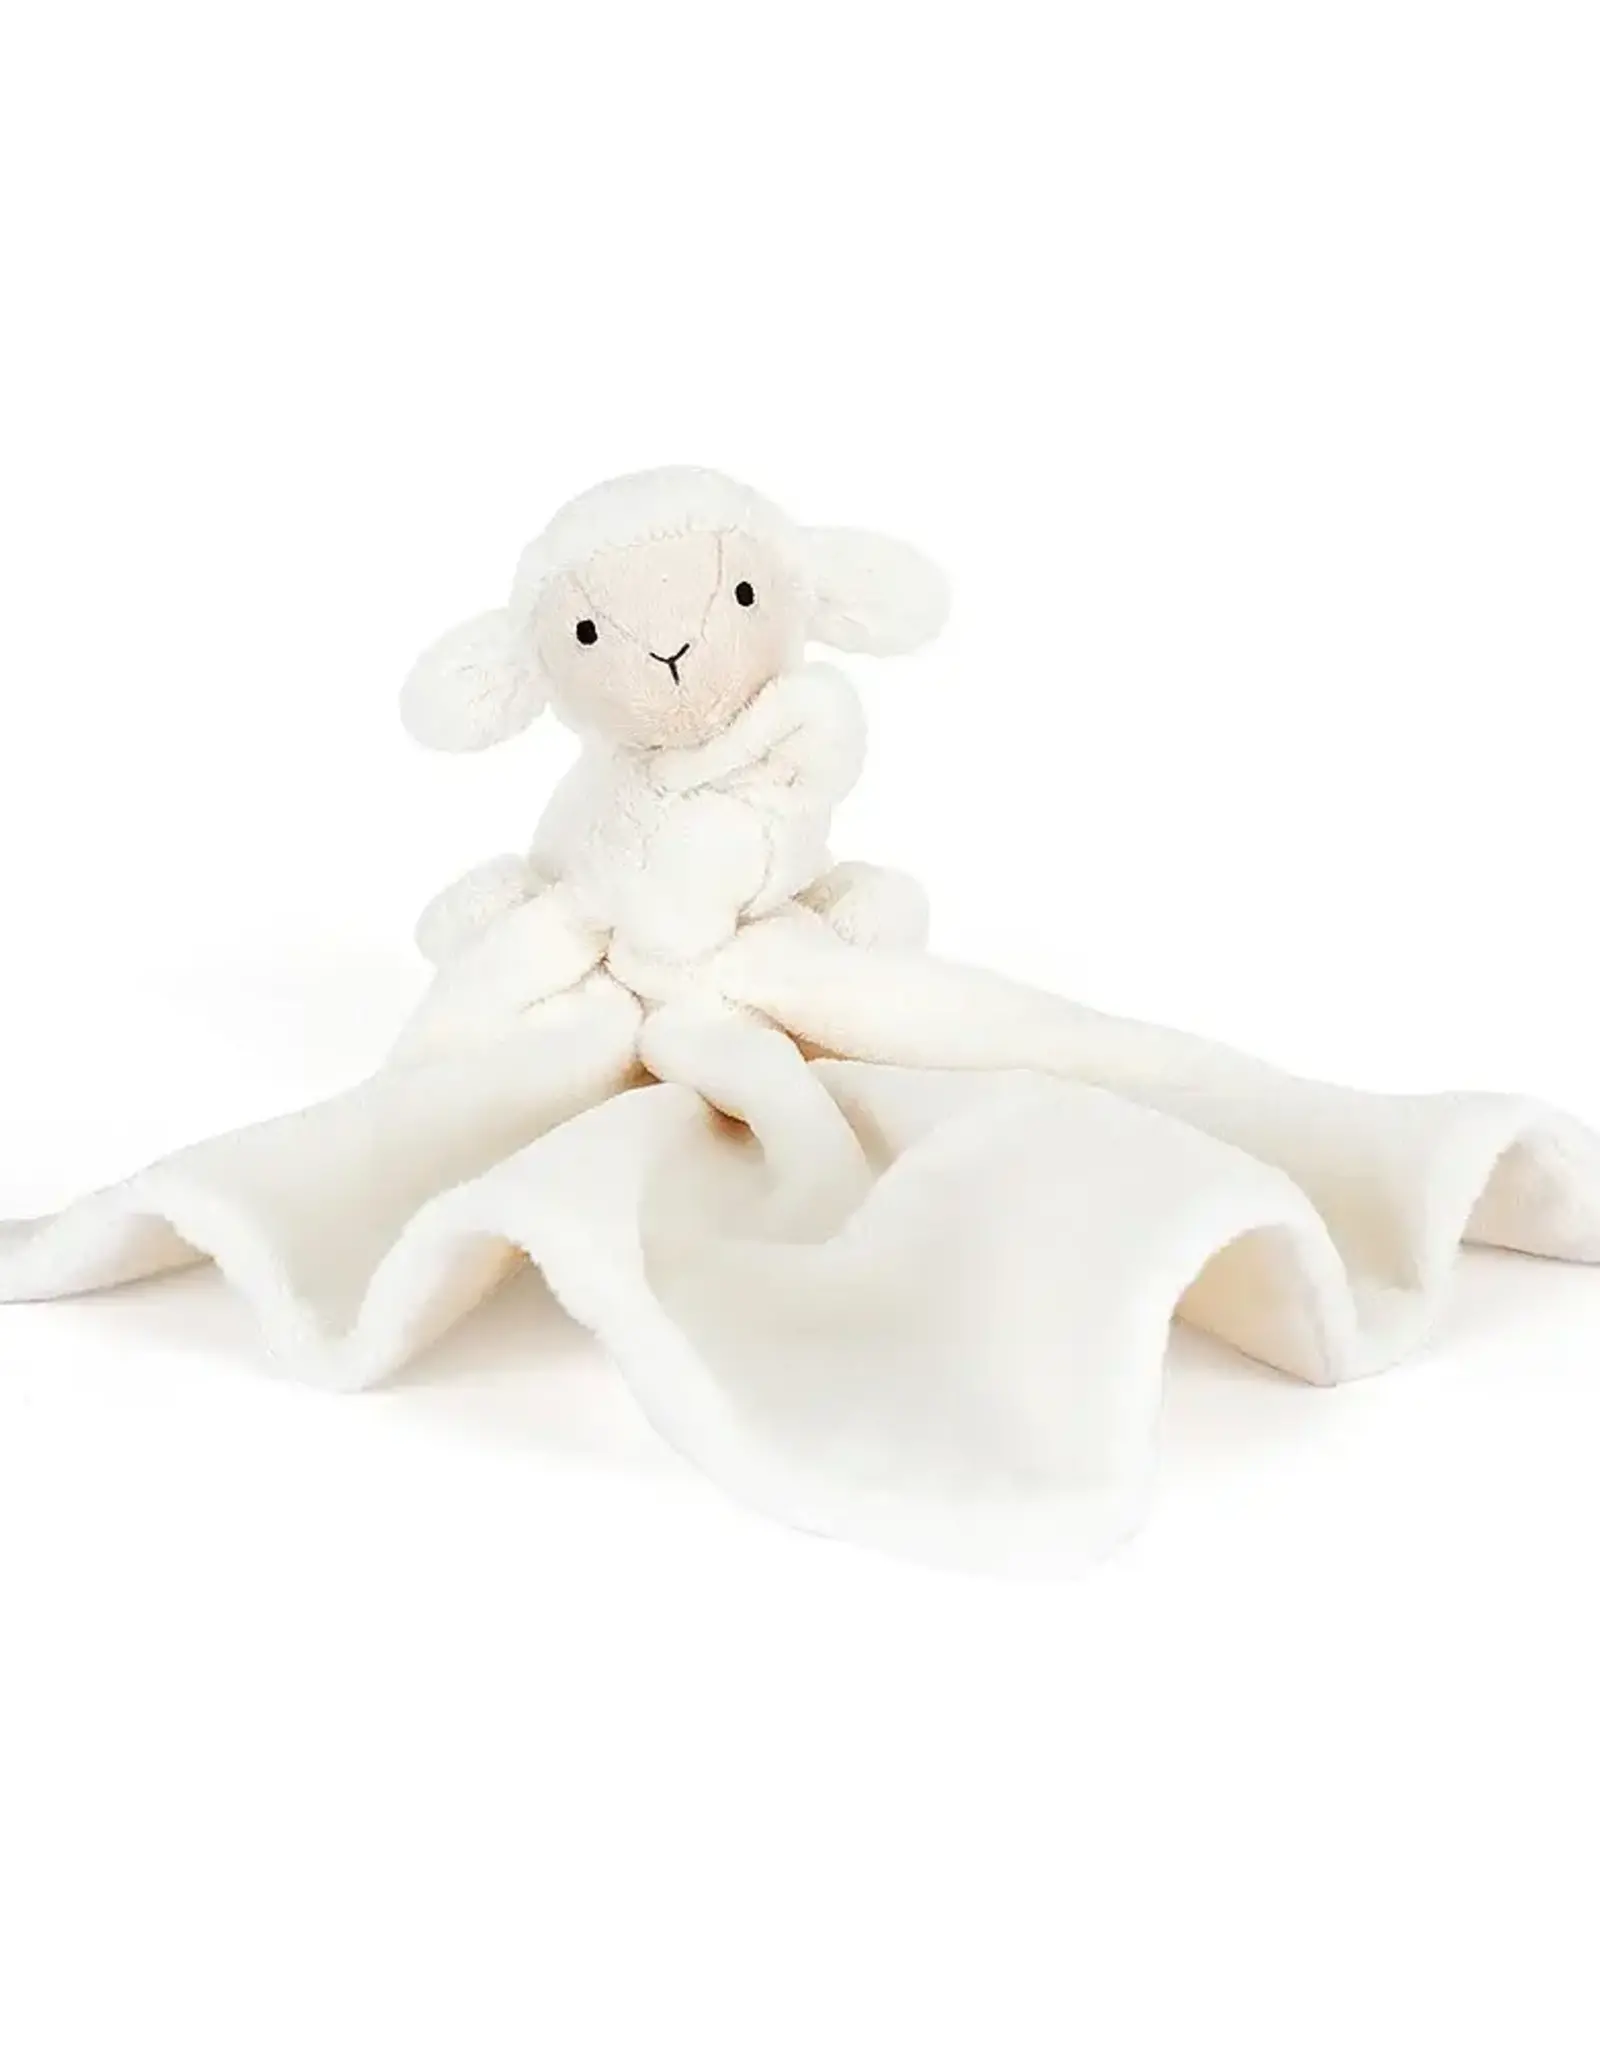 Jellycat Inc. Jellycat Bashful Lamb Soother